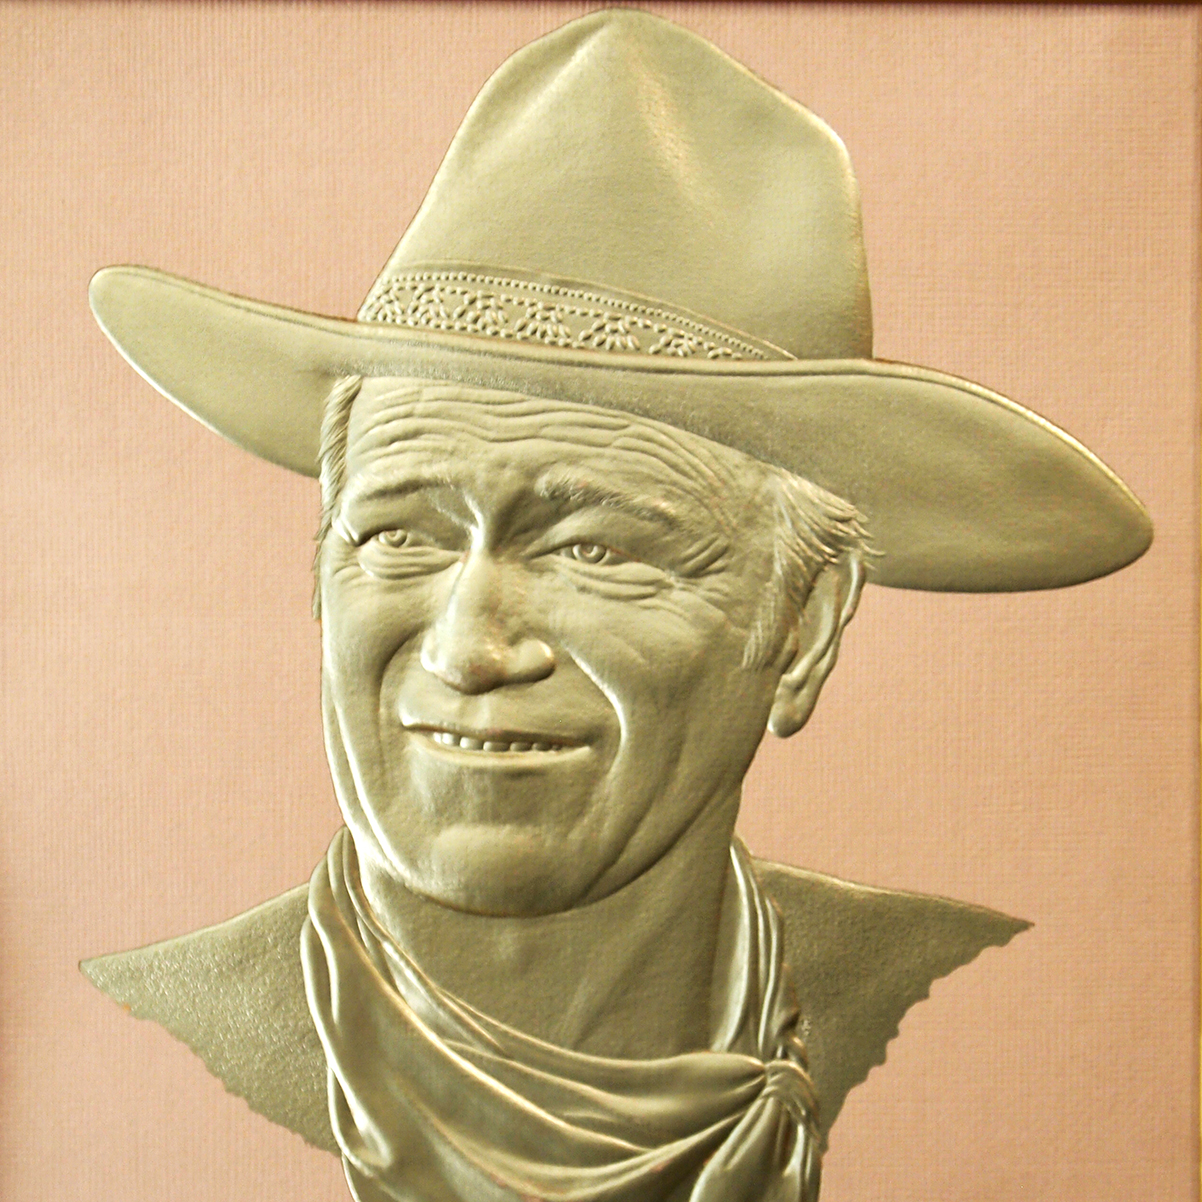 Sculpted multi-level emboss of a cowboy registered to foil on thick paper stock